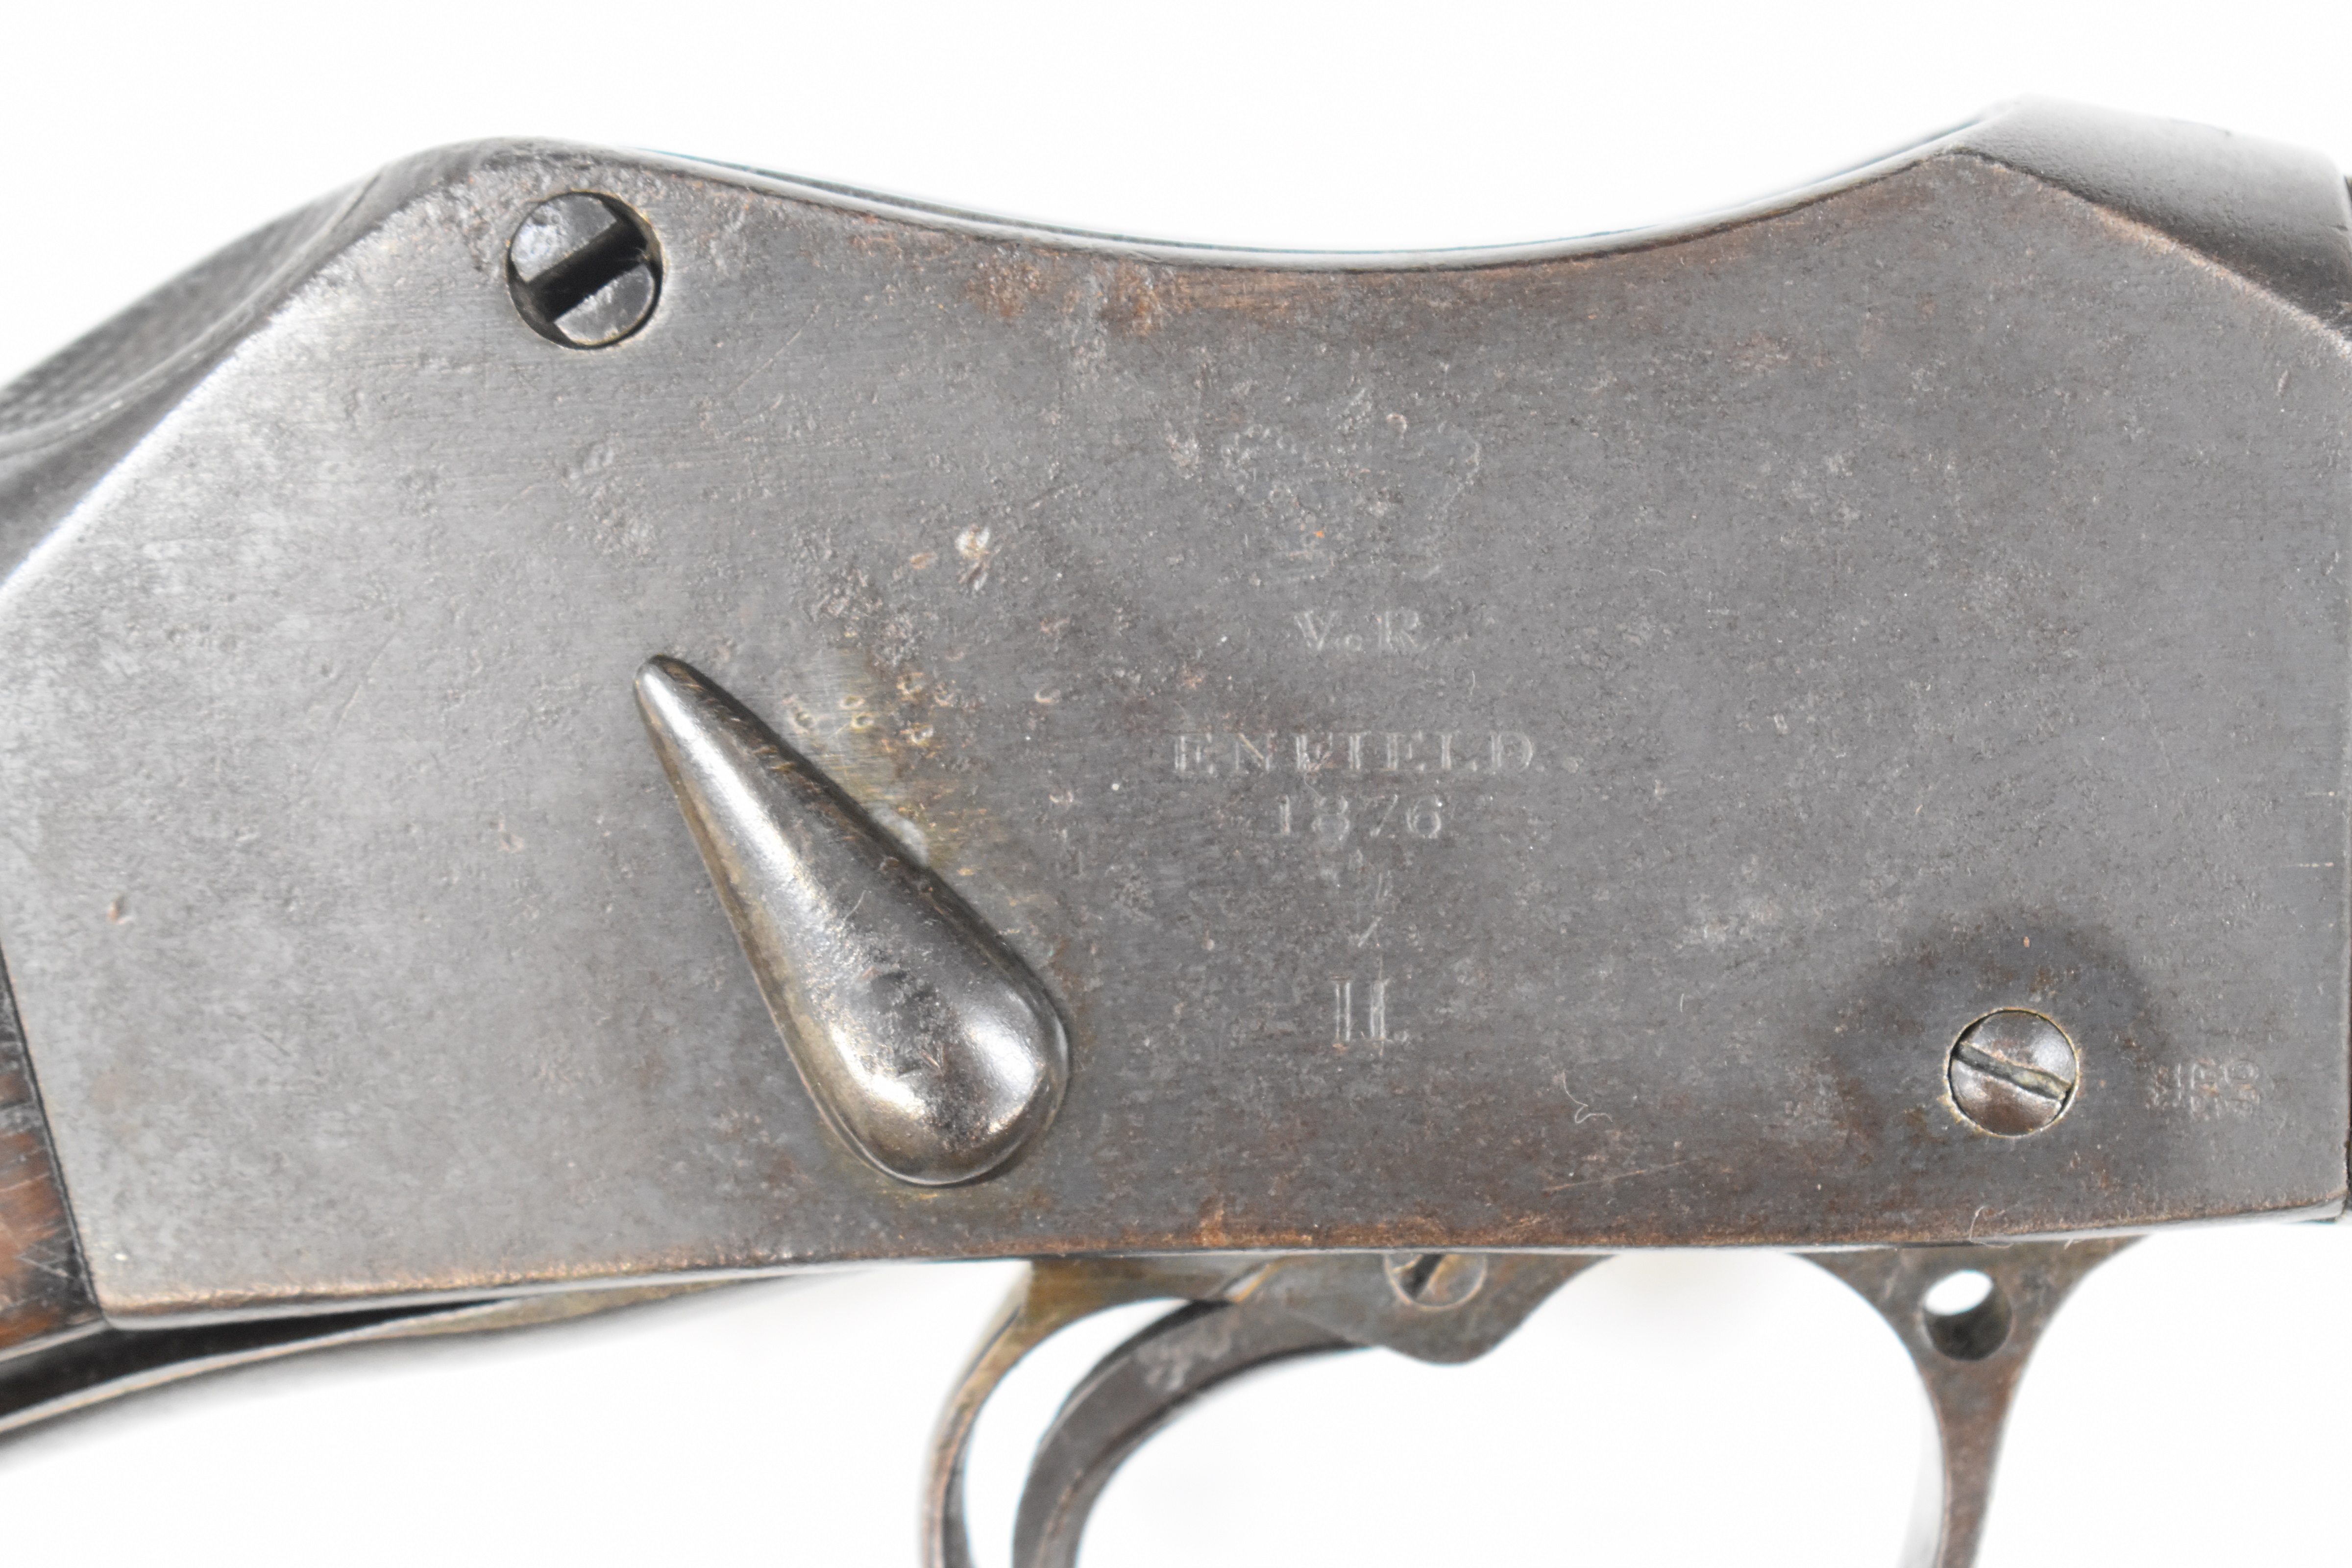 Enfield Martini-Henry Mark II .577/450 2-band carbine rifle with lock stamped 'VR Enfield 1876 - Image 10 of 10